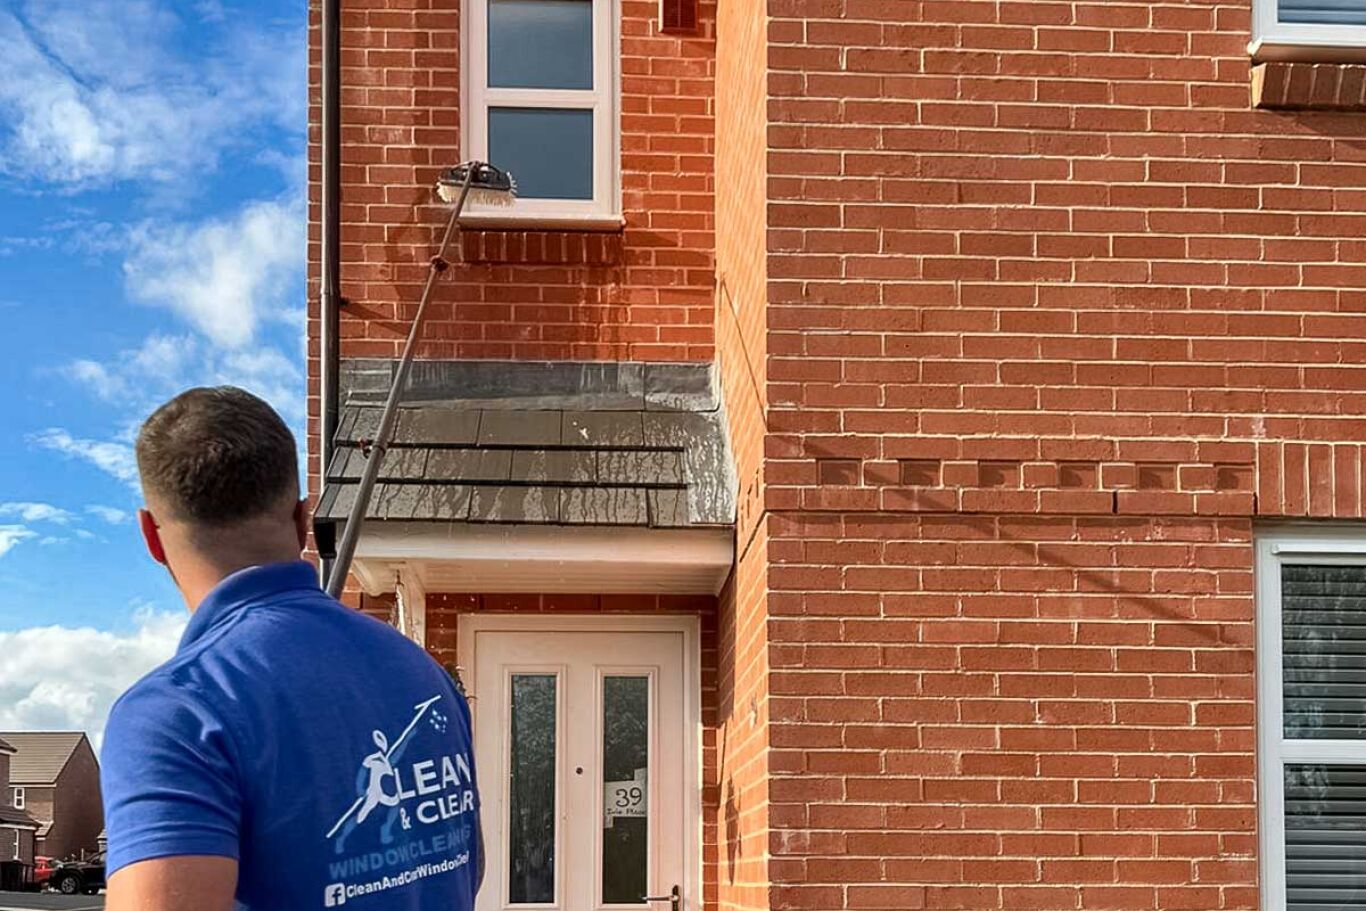 Man wearing a blue polo shirt cleaning first floor window.